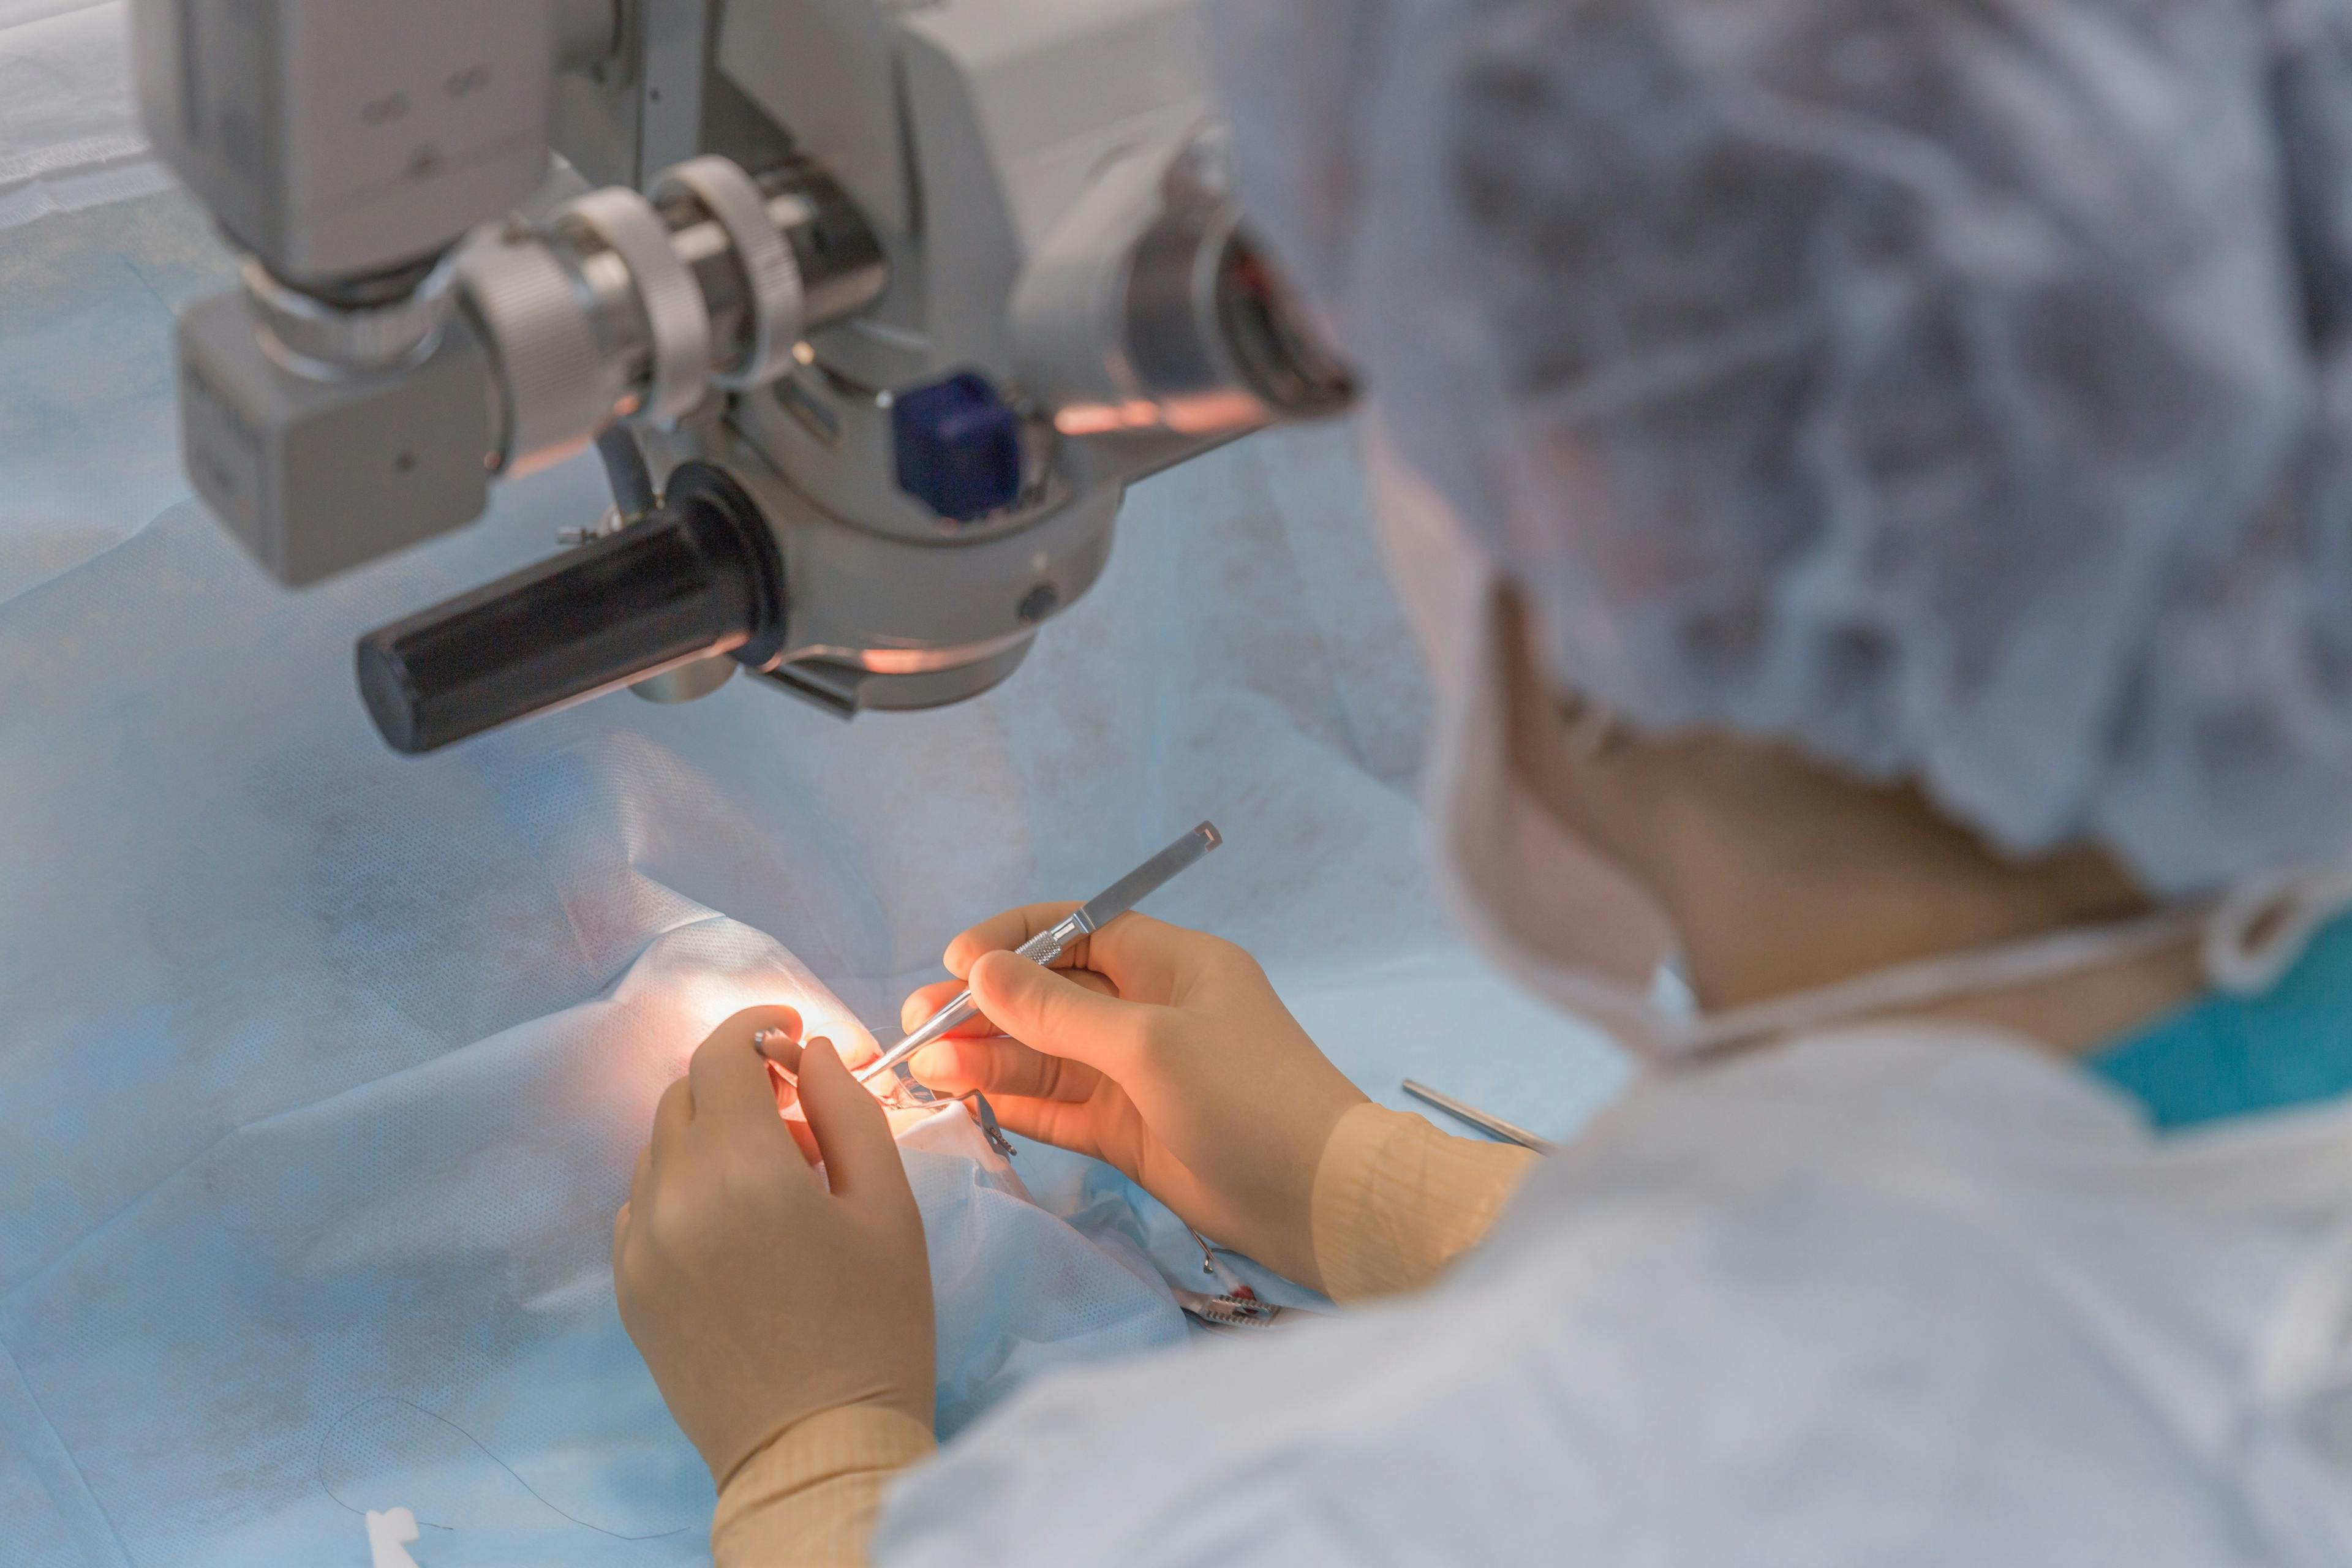 Cooling anesthesia a safe, effective alternative to subconjunctival lidocaine 